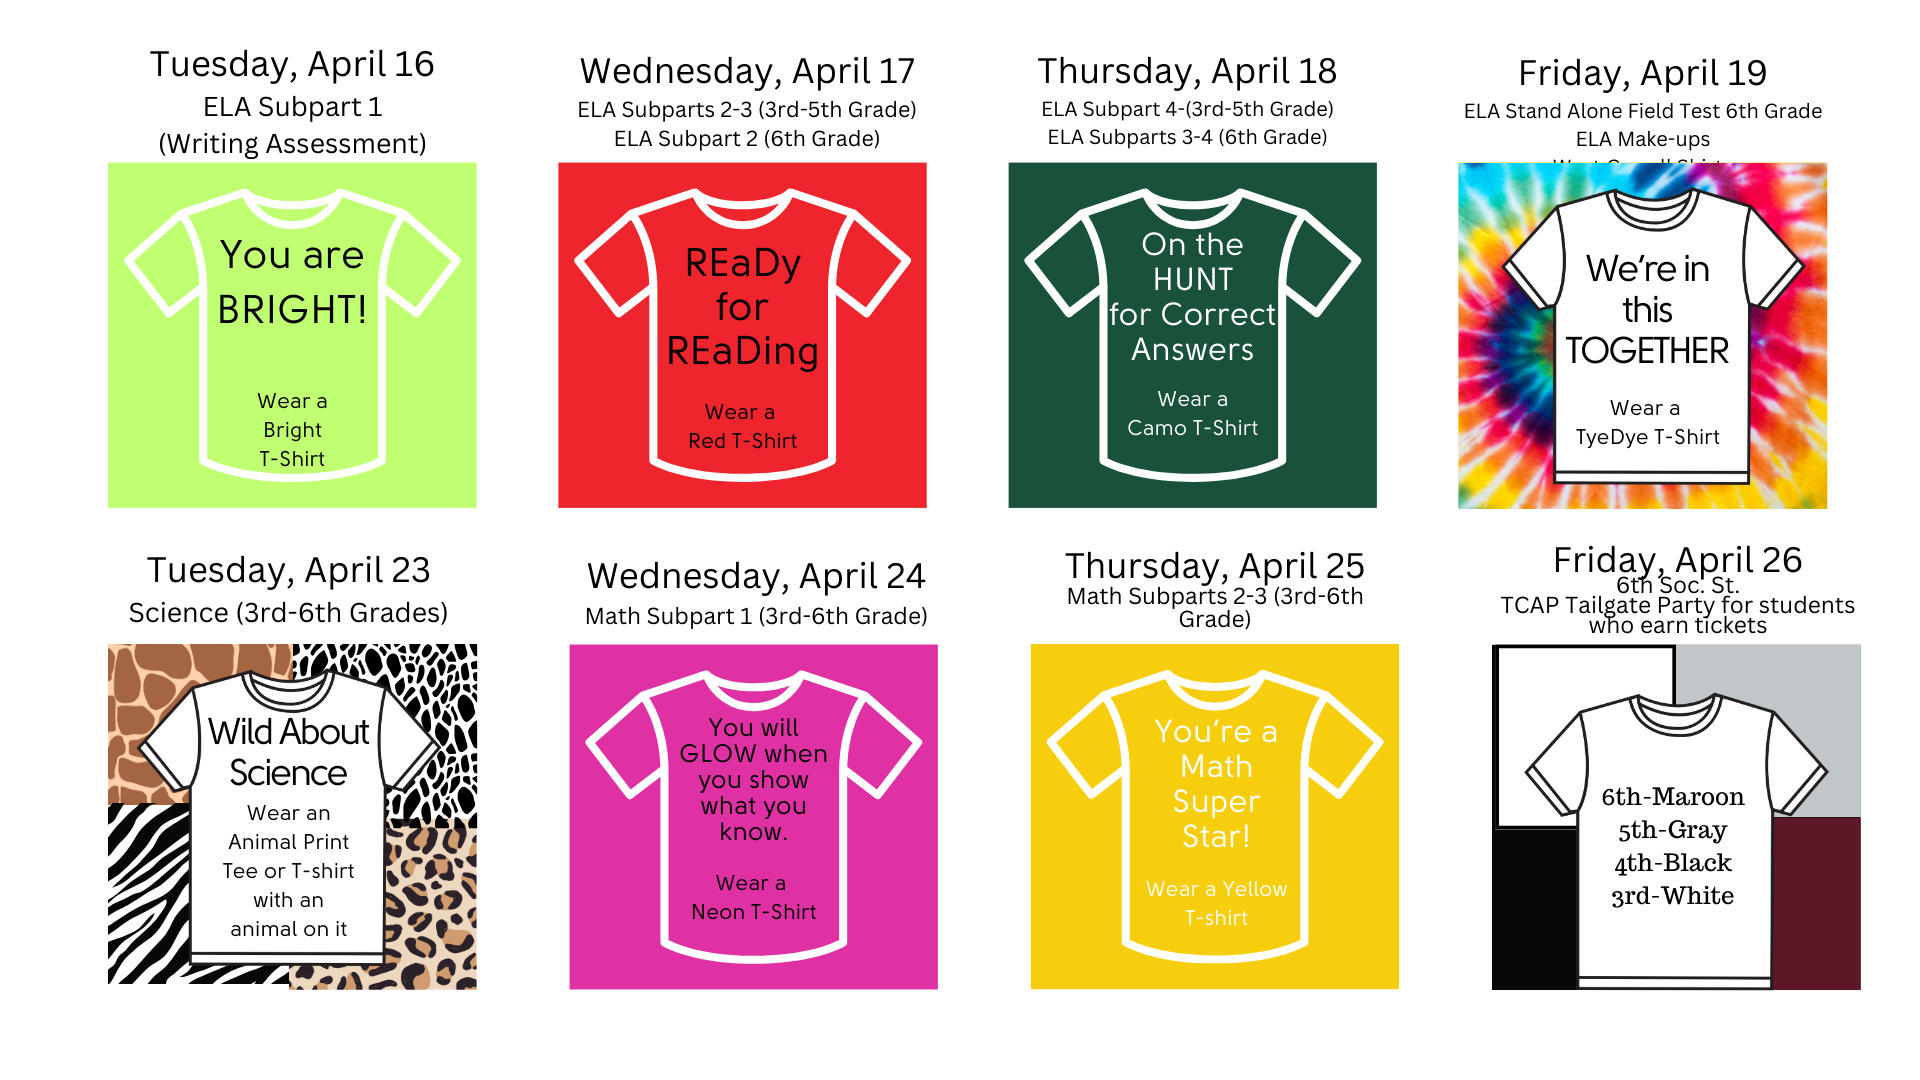 WCES Theme Days on TShirts for the Week of TCAP